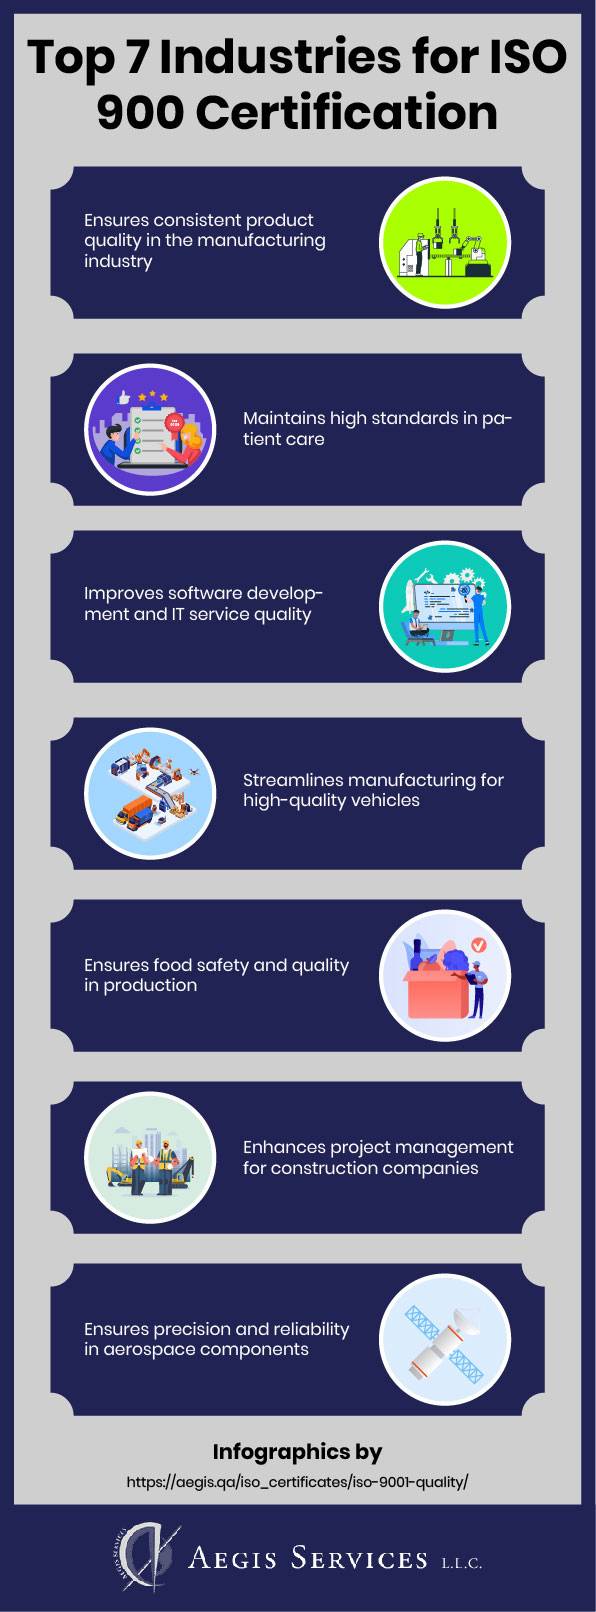 Top 7 Industries for ISO 900 Certification